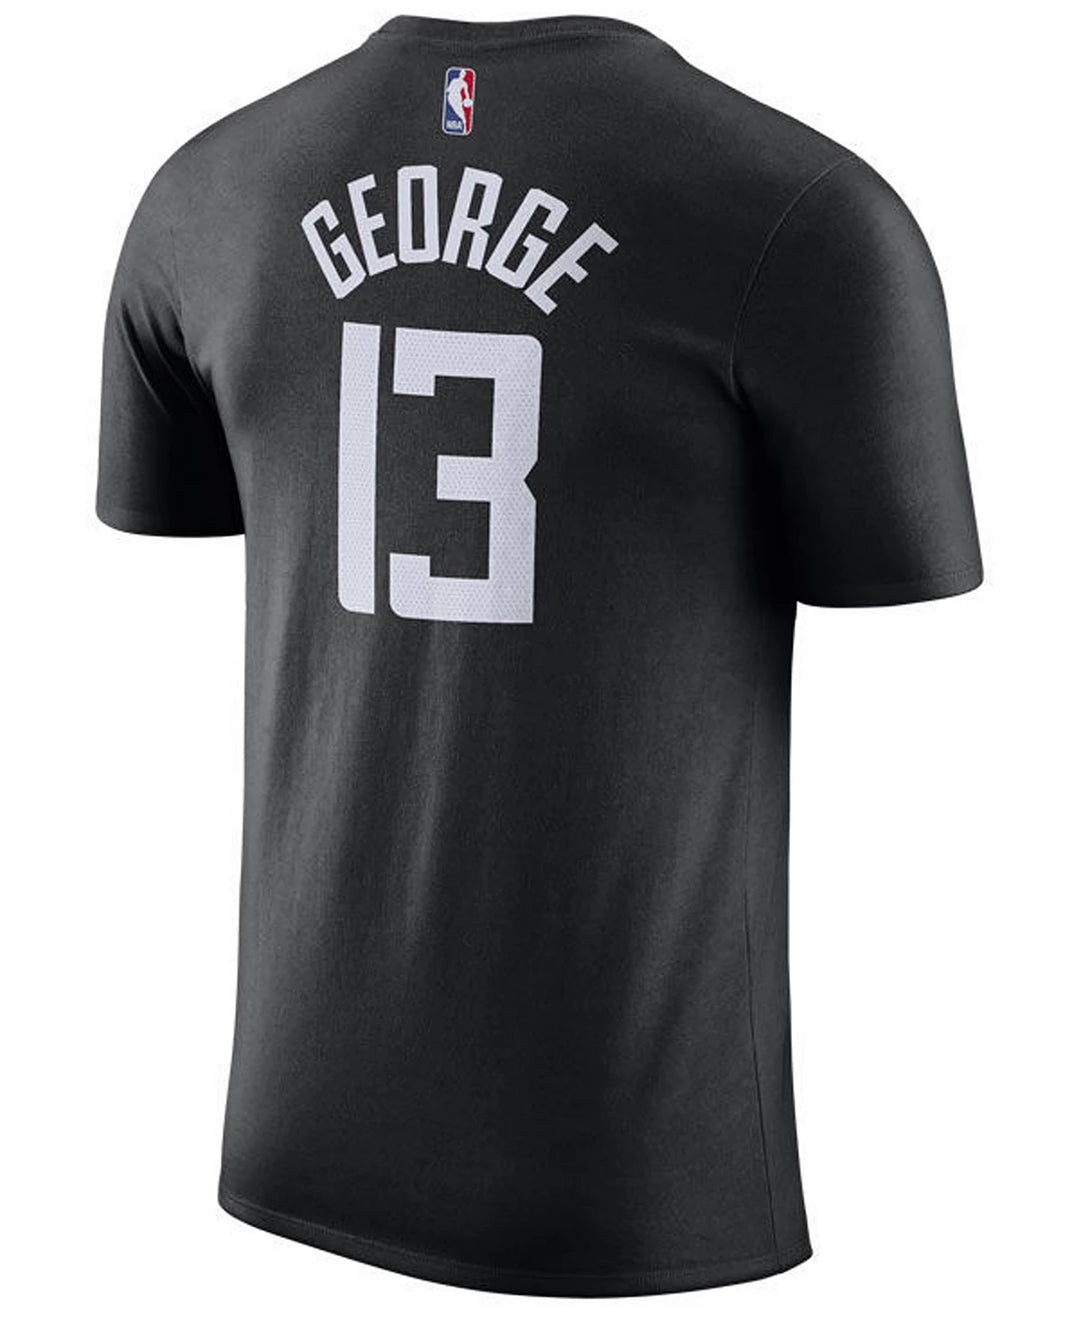 LA Clippers Paul George Statement Player T-Shirt